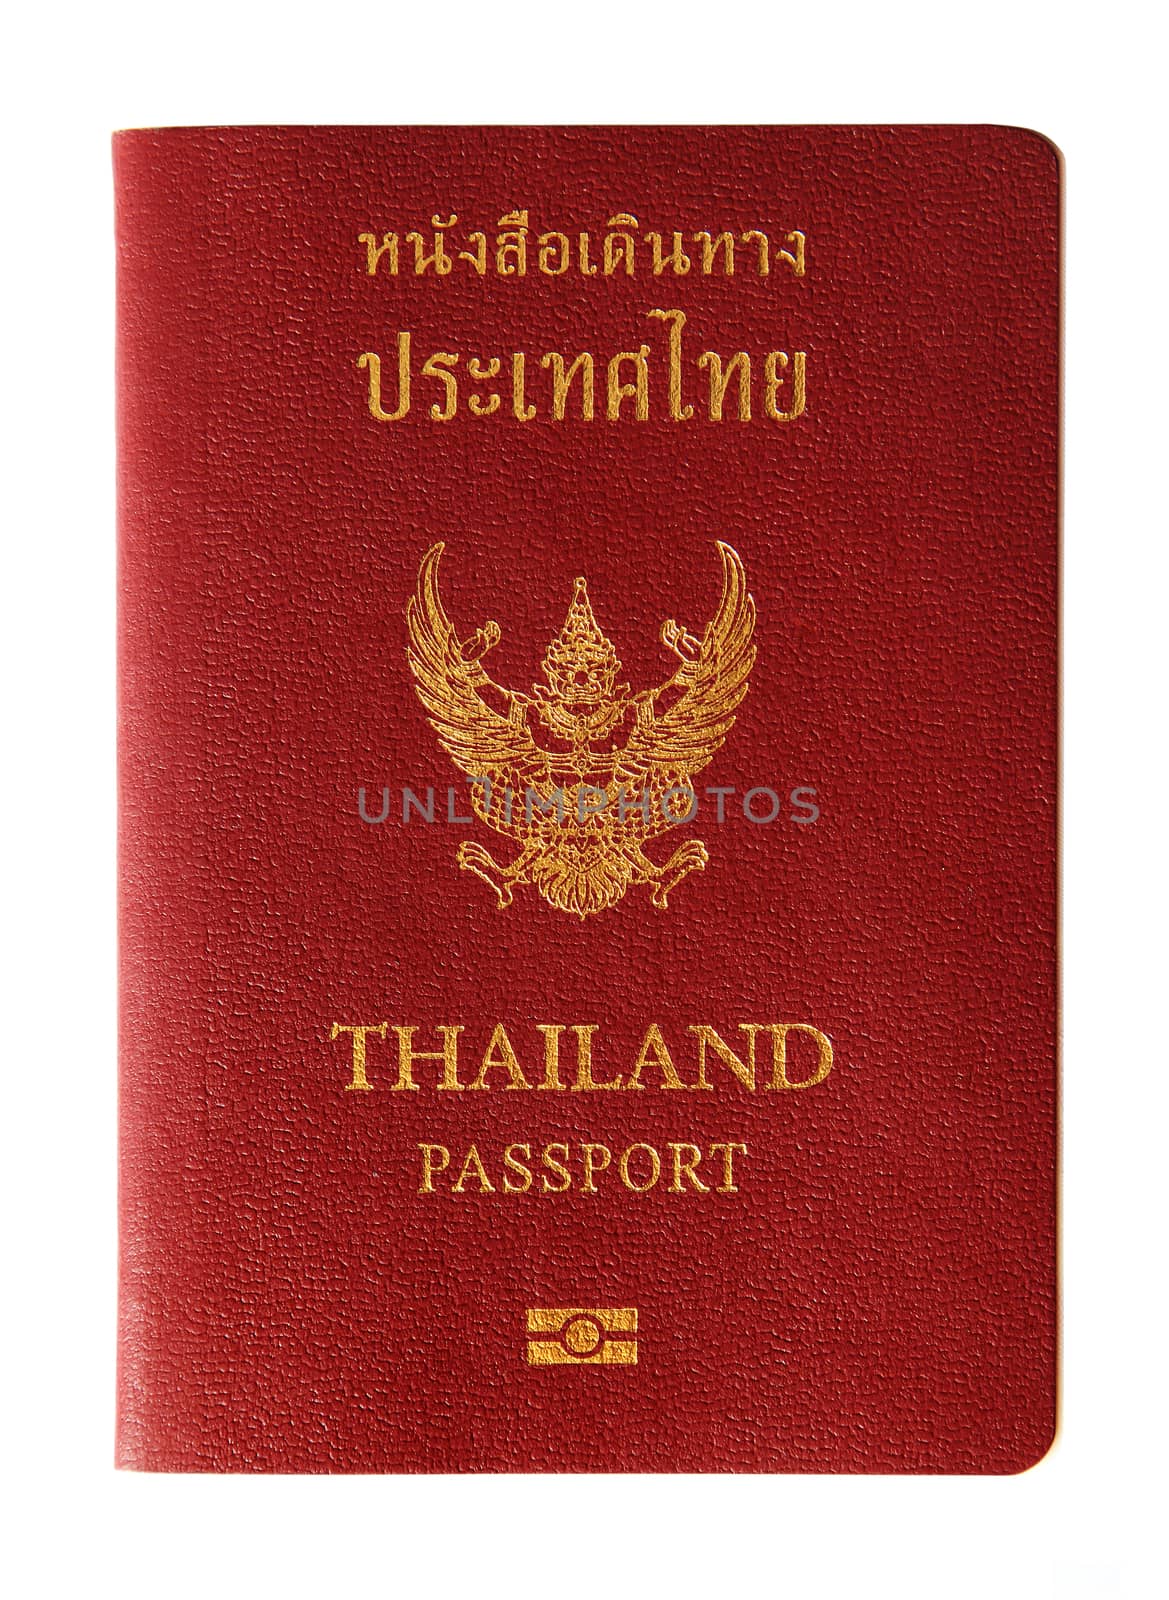 Thailand passport isolated on white by foto76